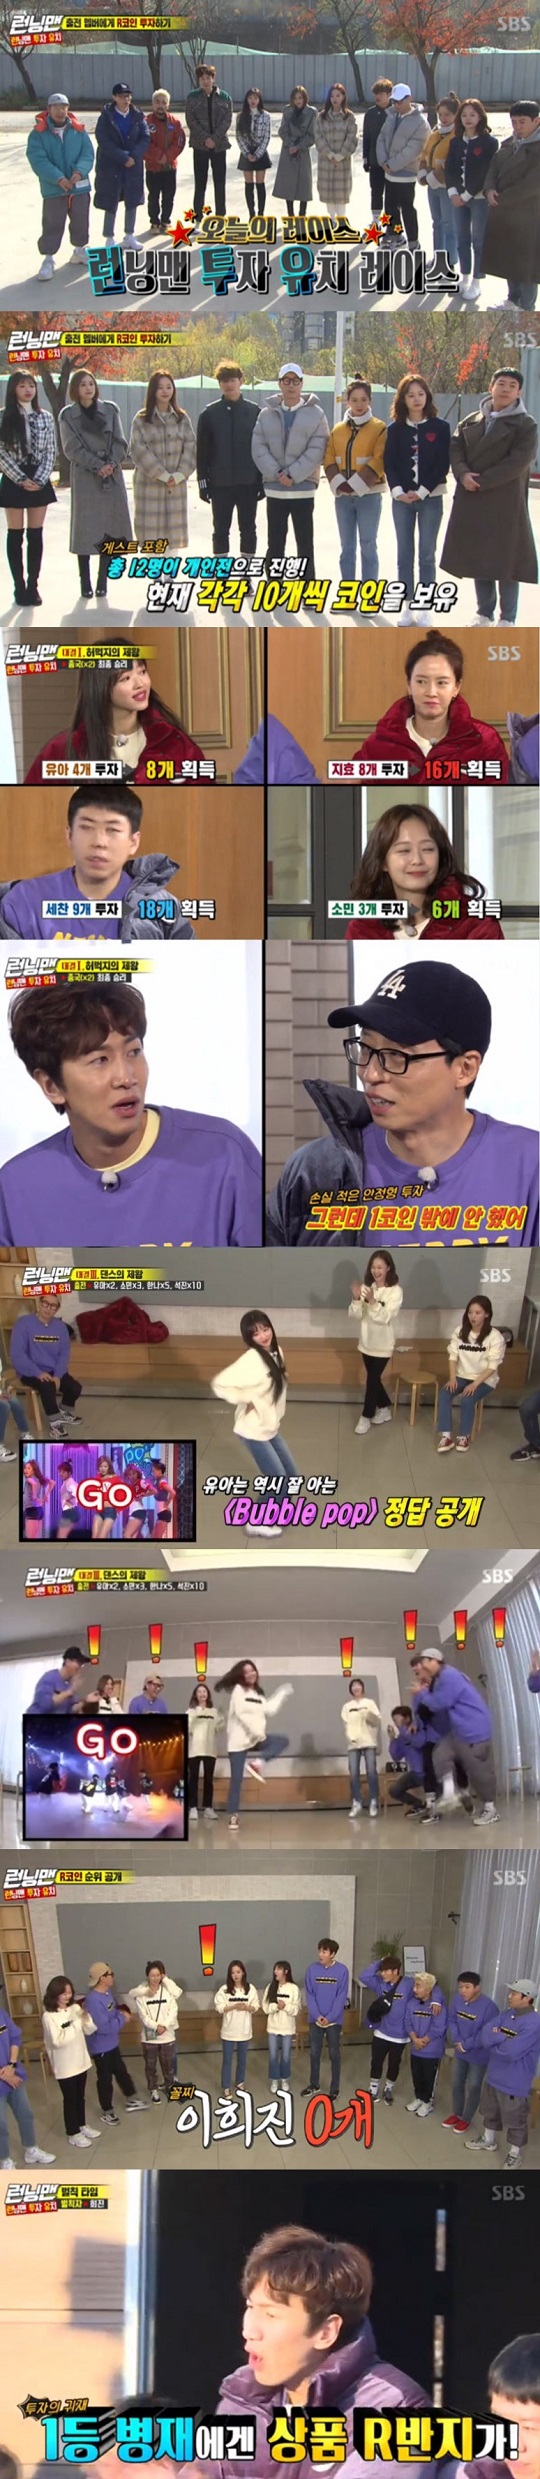 Running Man kept the top 2049 target TV viewer ratings.According to Nielsen Korea, a TV viewer rating research institute, SBS Running Man, which was broadcast on the 8th, ranked first in entertainment in the same time zone with 3.7% of 2049 target TV viewer ratings (based on the second part of the metropolitan area furniture TV viewer ratings).The average TV viewer ratings were 5% for the first part and 7.1% for the second part, while the highest TV viewer ratings per minute soared to 7.9%.On this day, Running Man Investment Race was held as a guest by actor Kang Na, Lee Hee-Jin, YooAA of Ohmai Girl, and broadcaster Yoo Byung-jae.Members can invest RCOIN in each round to call their assets, and the person with the least RCOIN will be punished.The first confrontation was a pain-bearing confrontation, The Lord of the thighs.With Kim Jong-kook winning as everyone expected, Lee Kwang-soo was hit in the thigh by Kim Jong-kook and pulled out painfully to laugh.Song Ji-hyo, Jeon So-min, Yang Se-chan and YooAA, who invested in Kim Jong-kook, were called RCOIN.In the second showdown quiz, The King of Quiz, Haha, Lee Kwang-soo, and Yoo Byung-jae, who invested in him as Brain YooA Jae-Suk won the championship, earned twice as much COIN.In the third confrontation The King of Dance, YooA A, a big dancer, attracted attention and won first place. Investors YooA Jae-Suk, Kim Jong-kook and Yoo Byung-jae also succeeded in being called COIN.In particular, Yoo Byung-jae won the final prize with a lot of COIN in the final match, and Lee Hee-Jin won the Water bomb penalty with 0 COIN.The scene hit a best minute with top TV viewer ratings of 7.9 per minute.Photo: SBS